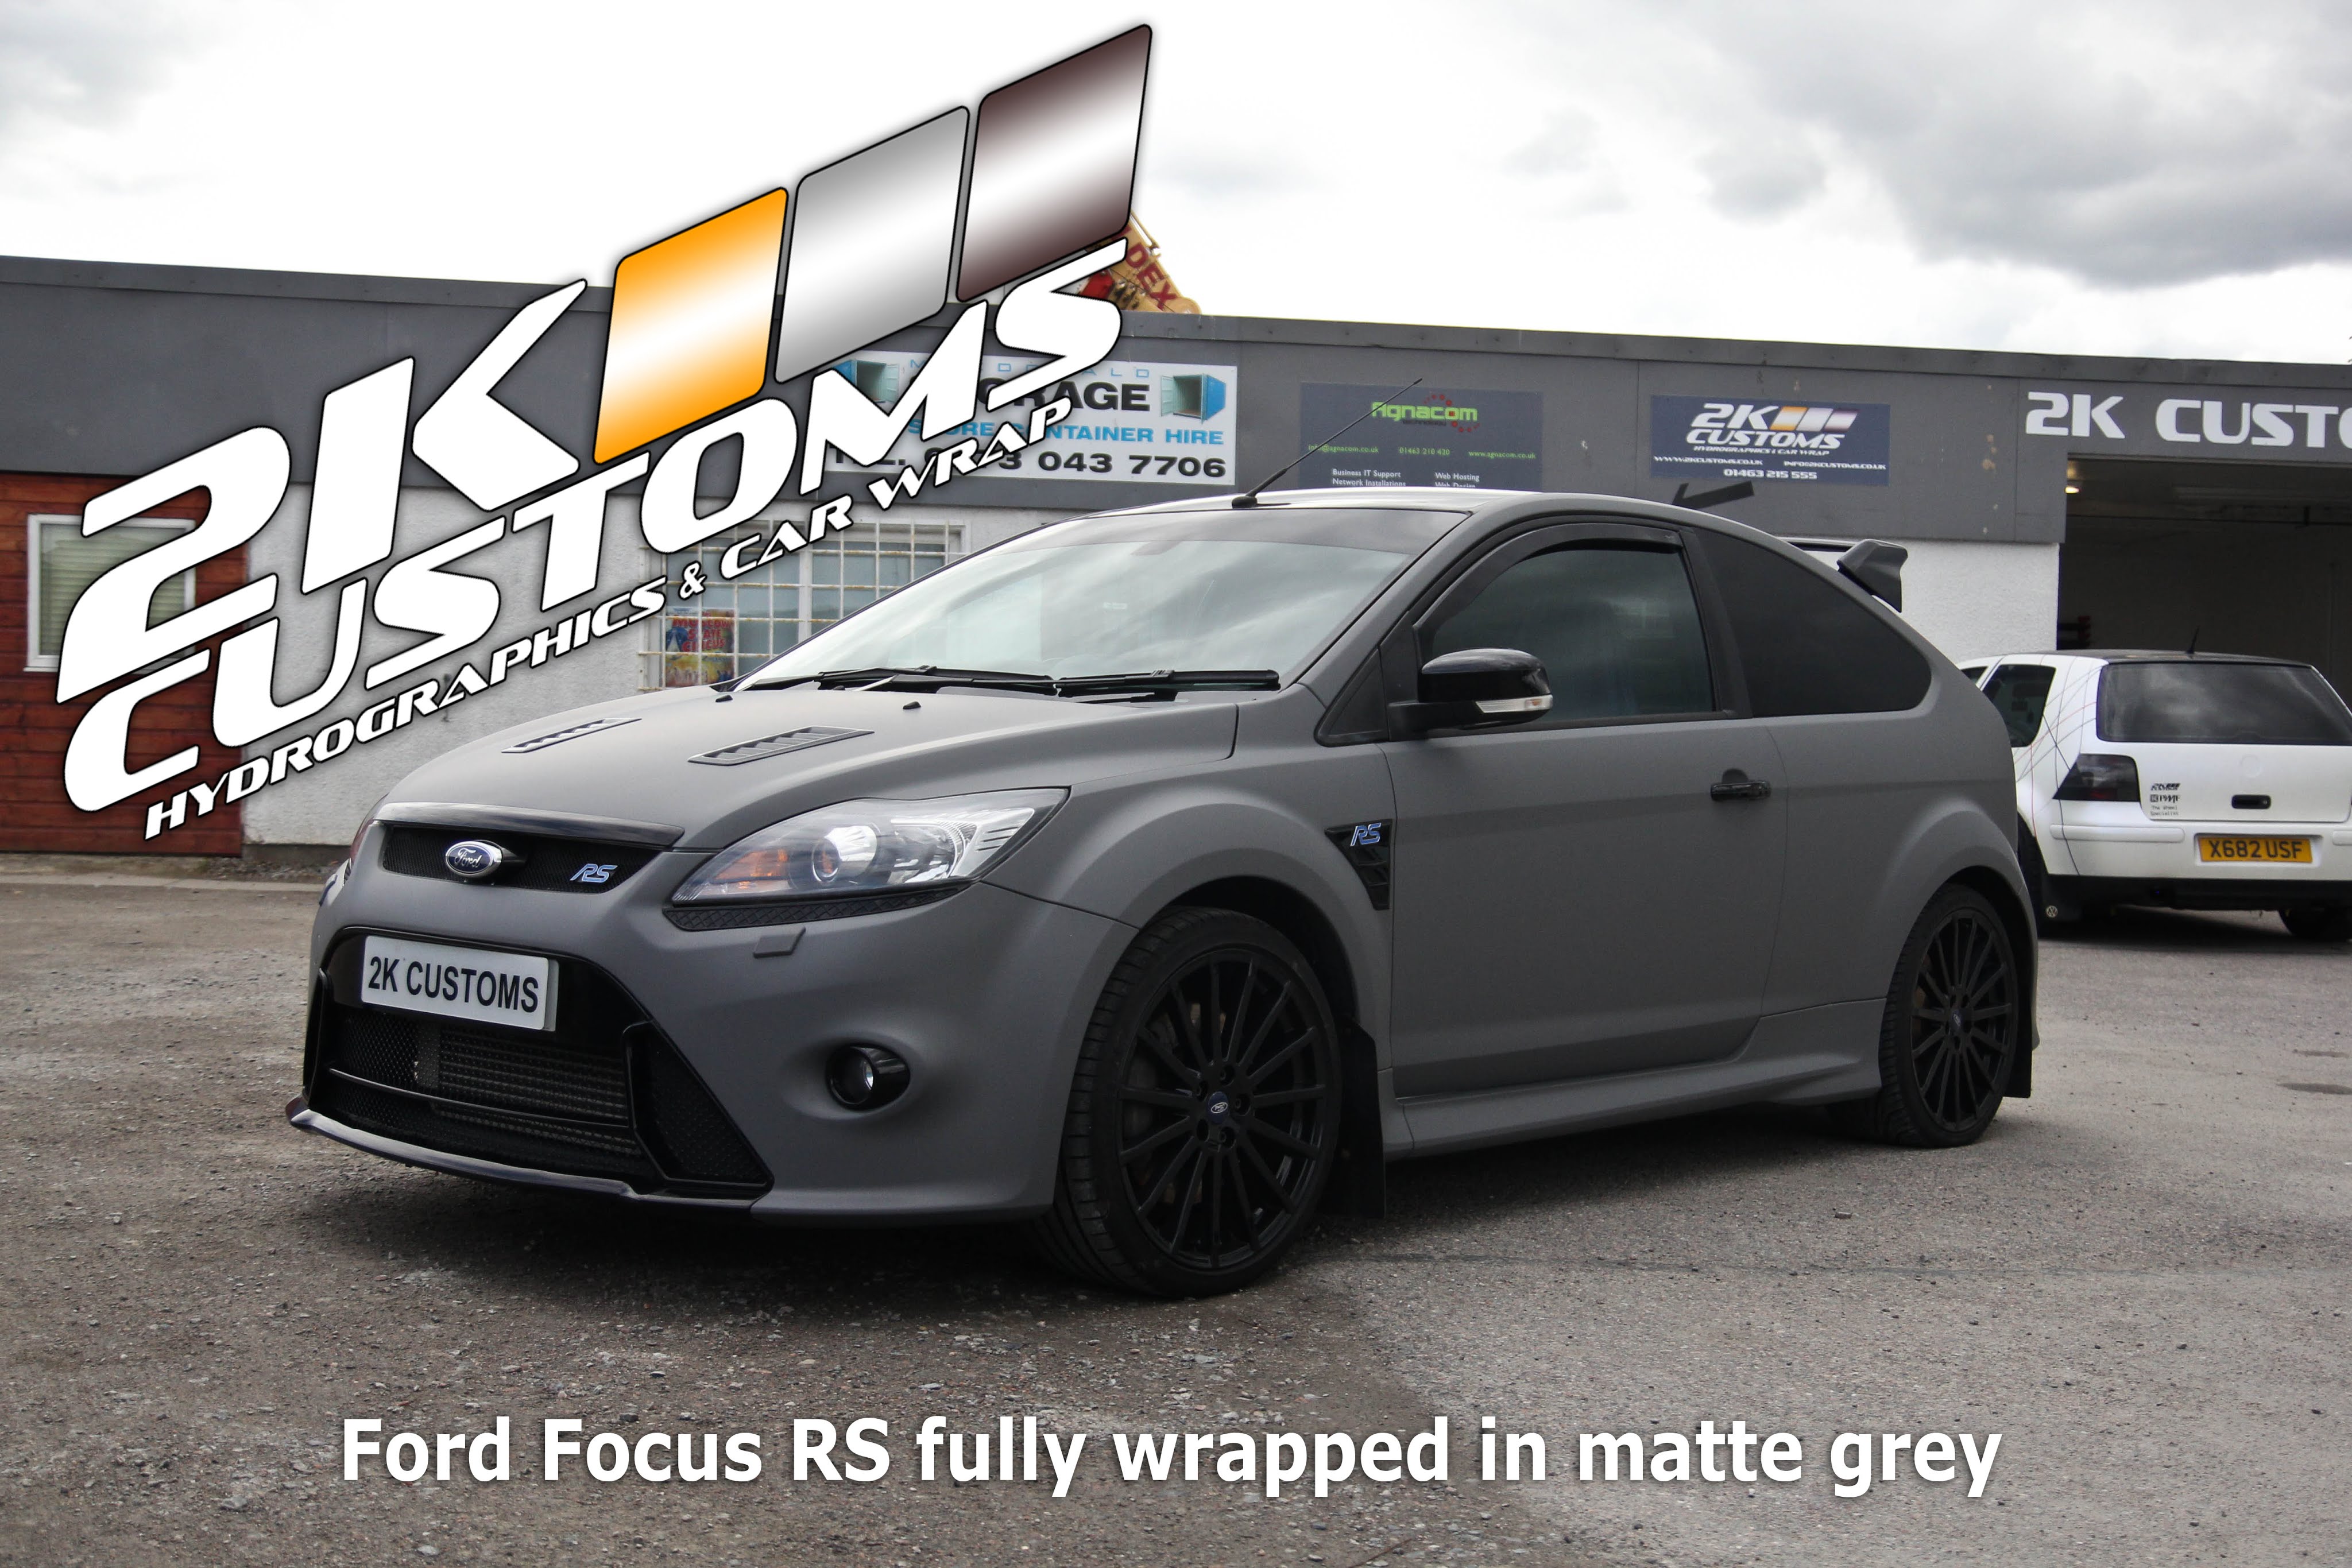 Weekly vlog & Ford Focus RS full car wrap in matte grey - YouTube